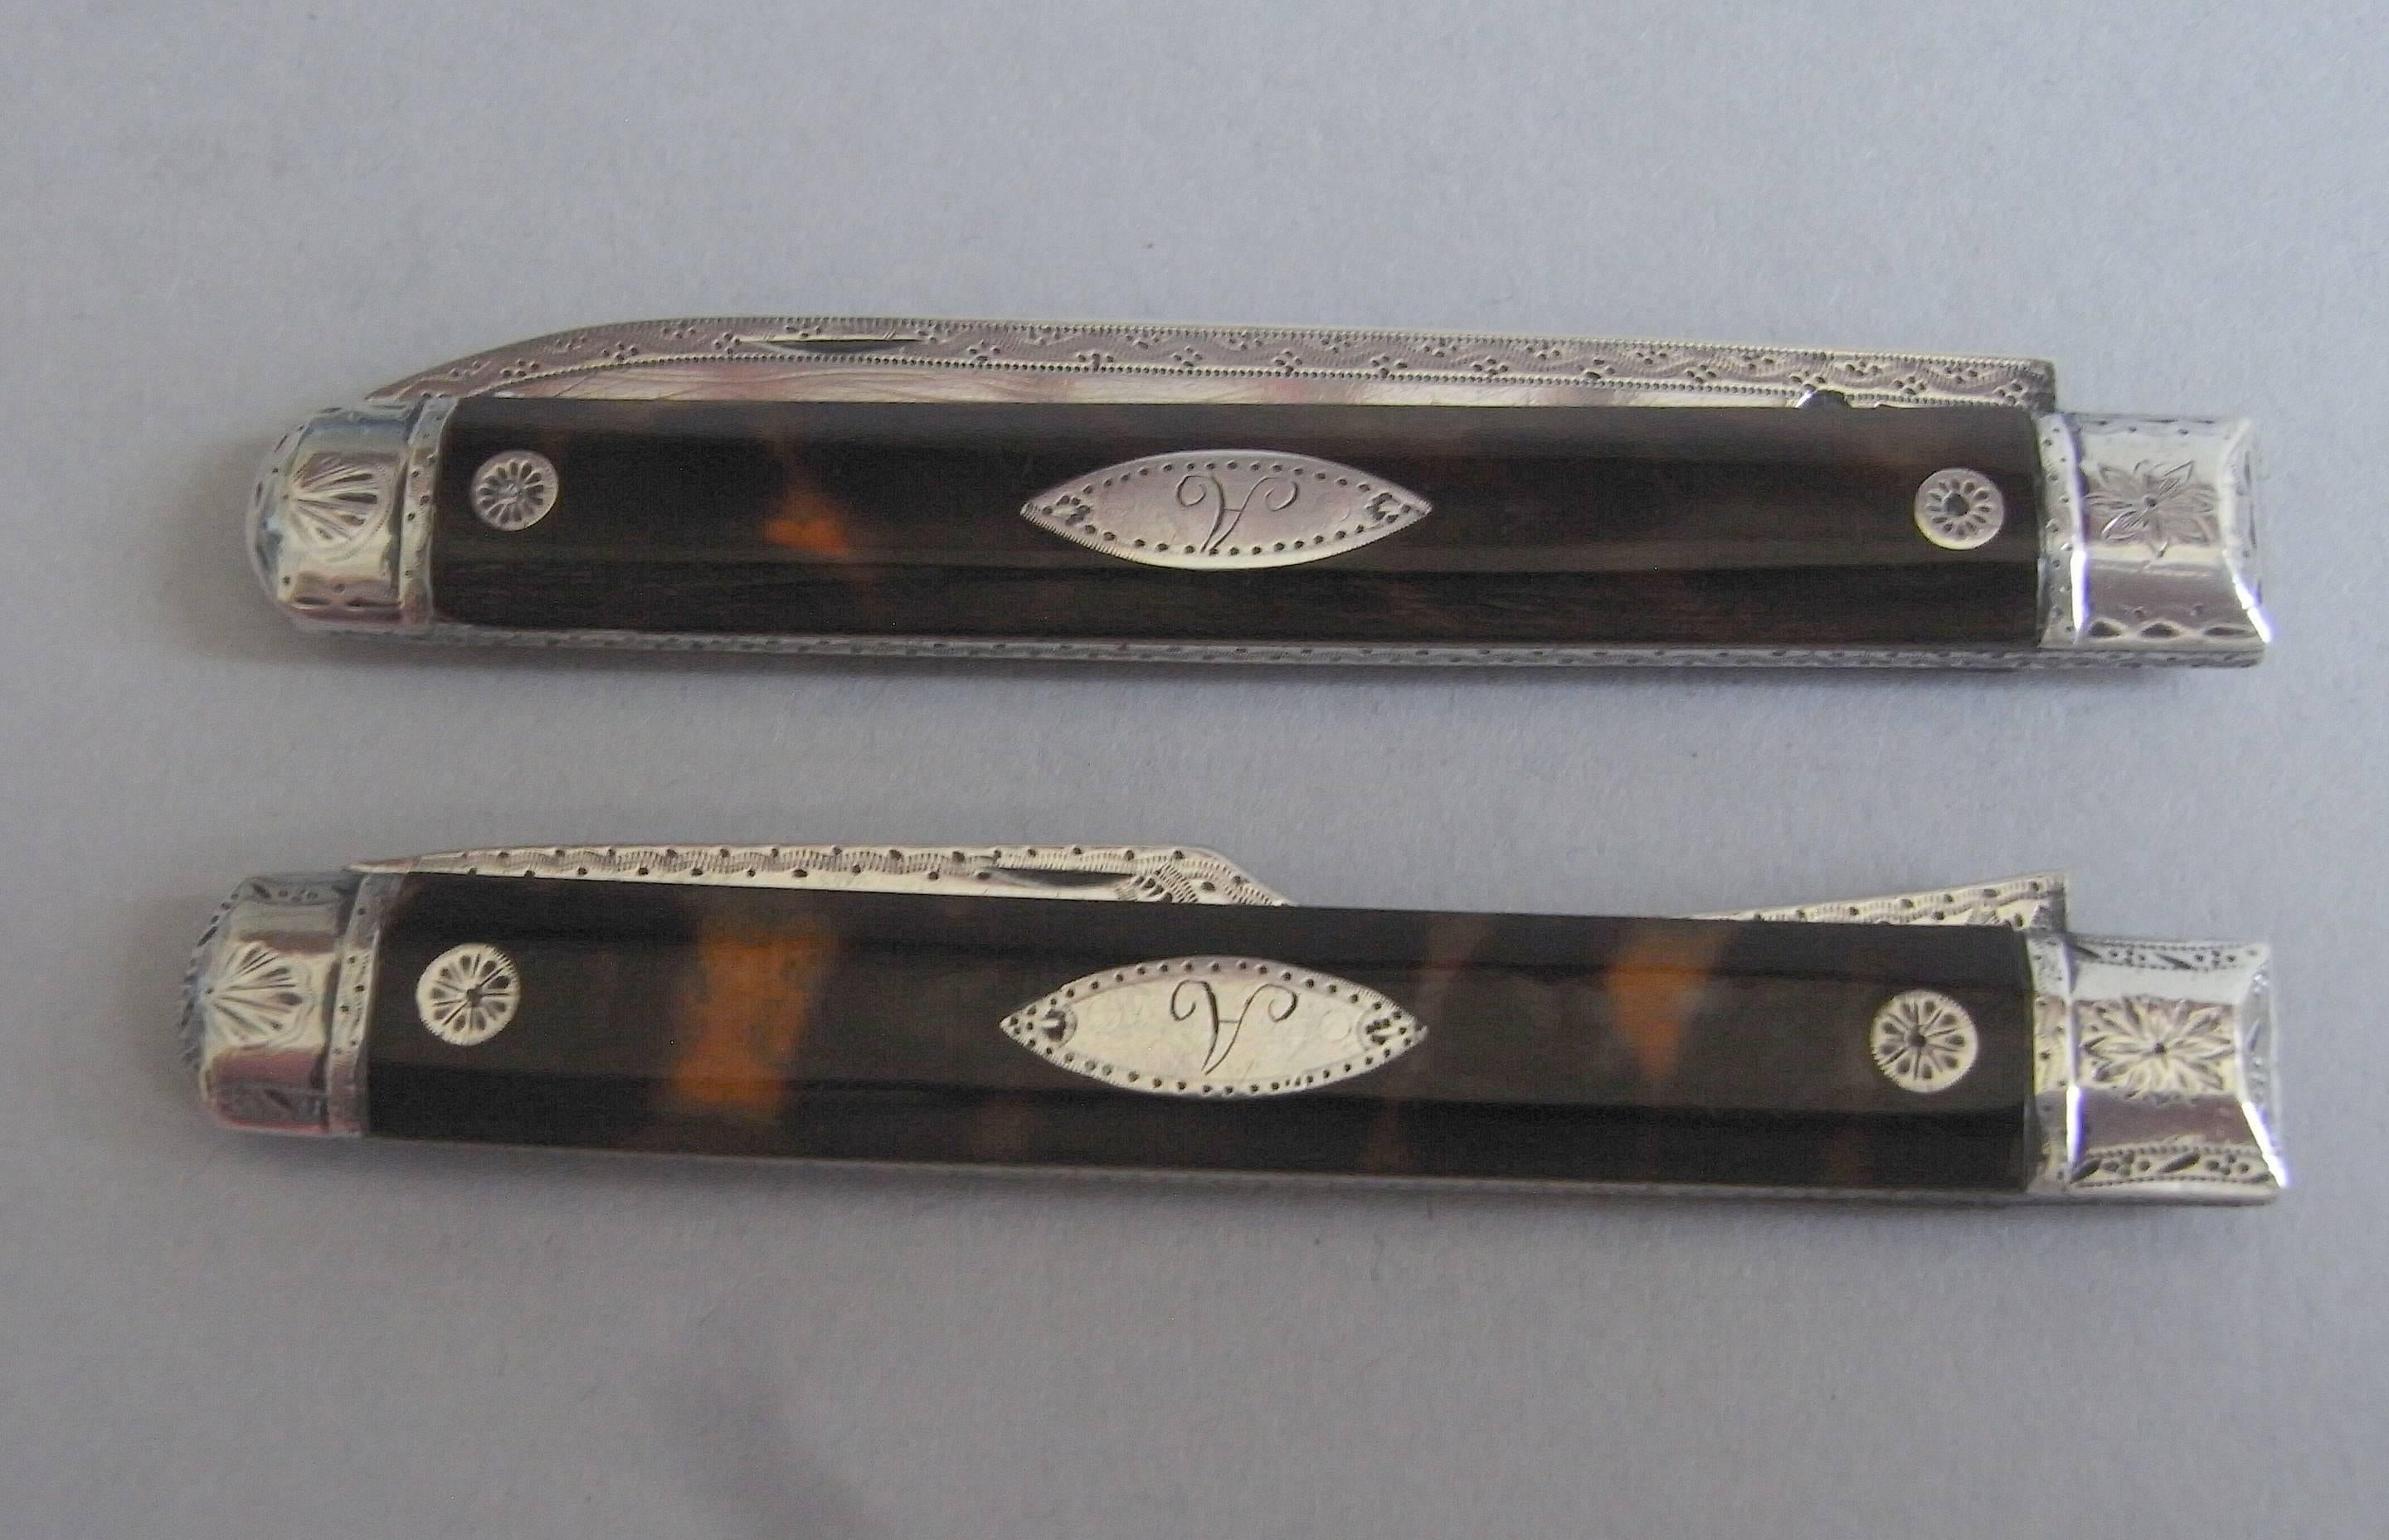 The blade of the knife and tines of the fork are decorated with crisp bright cut designs, as are the silver tops of the handles. The tortoiseshell panels are beautifully shaped and are inlaid with stylised flower heads and a navette shaped cartouche